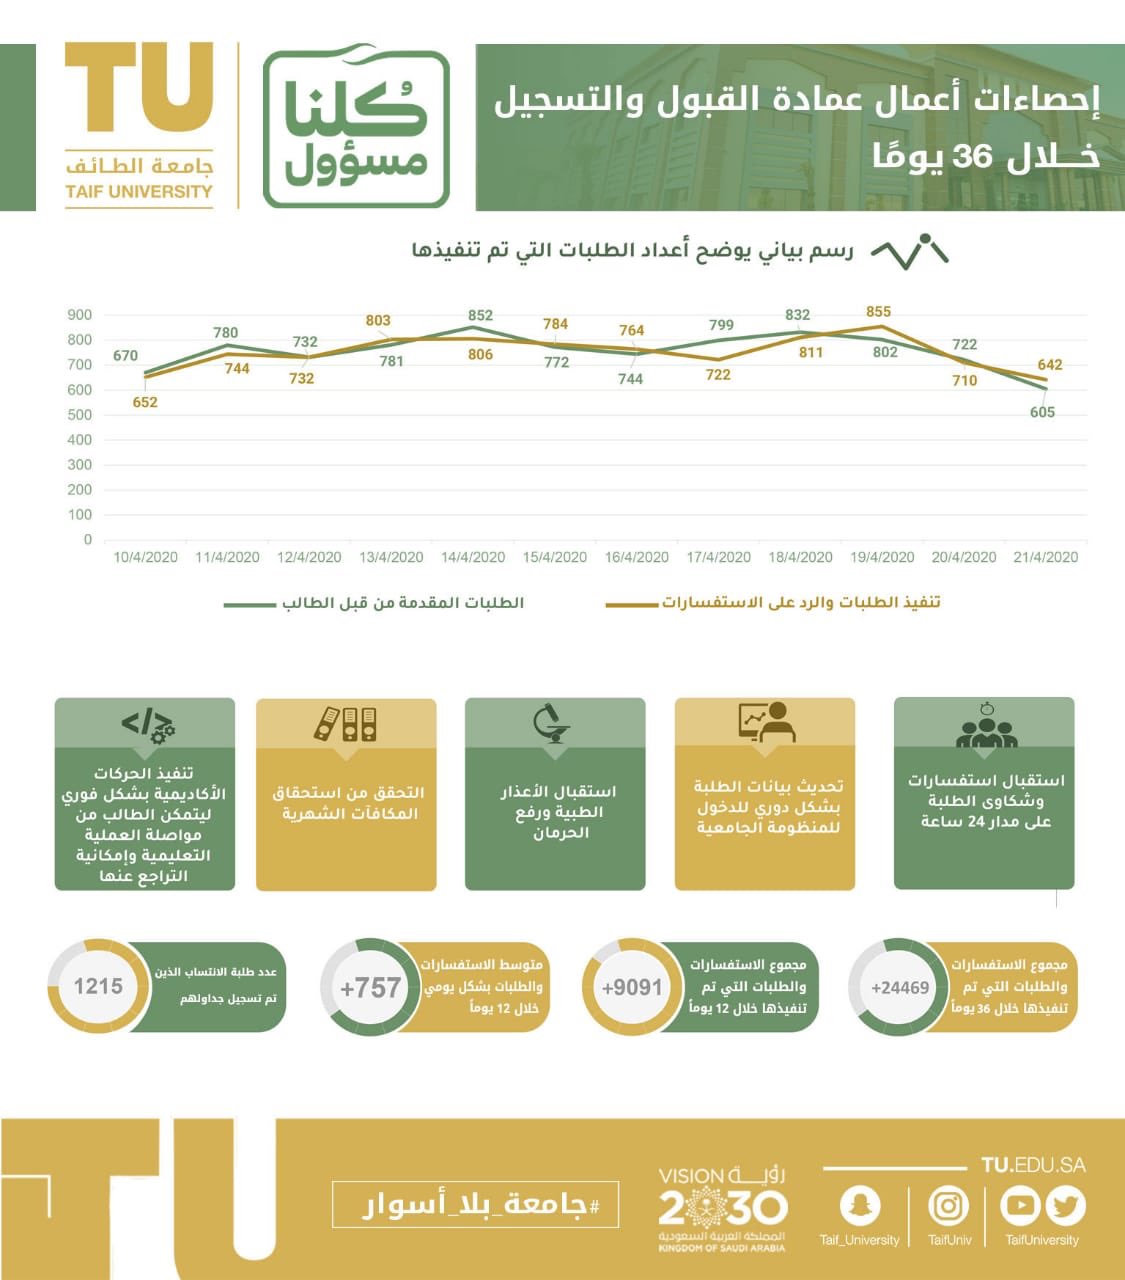 Business statistics of the Deanship of Admission and Registration within 36 days.